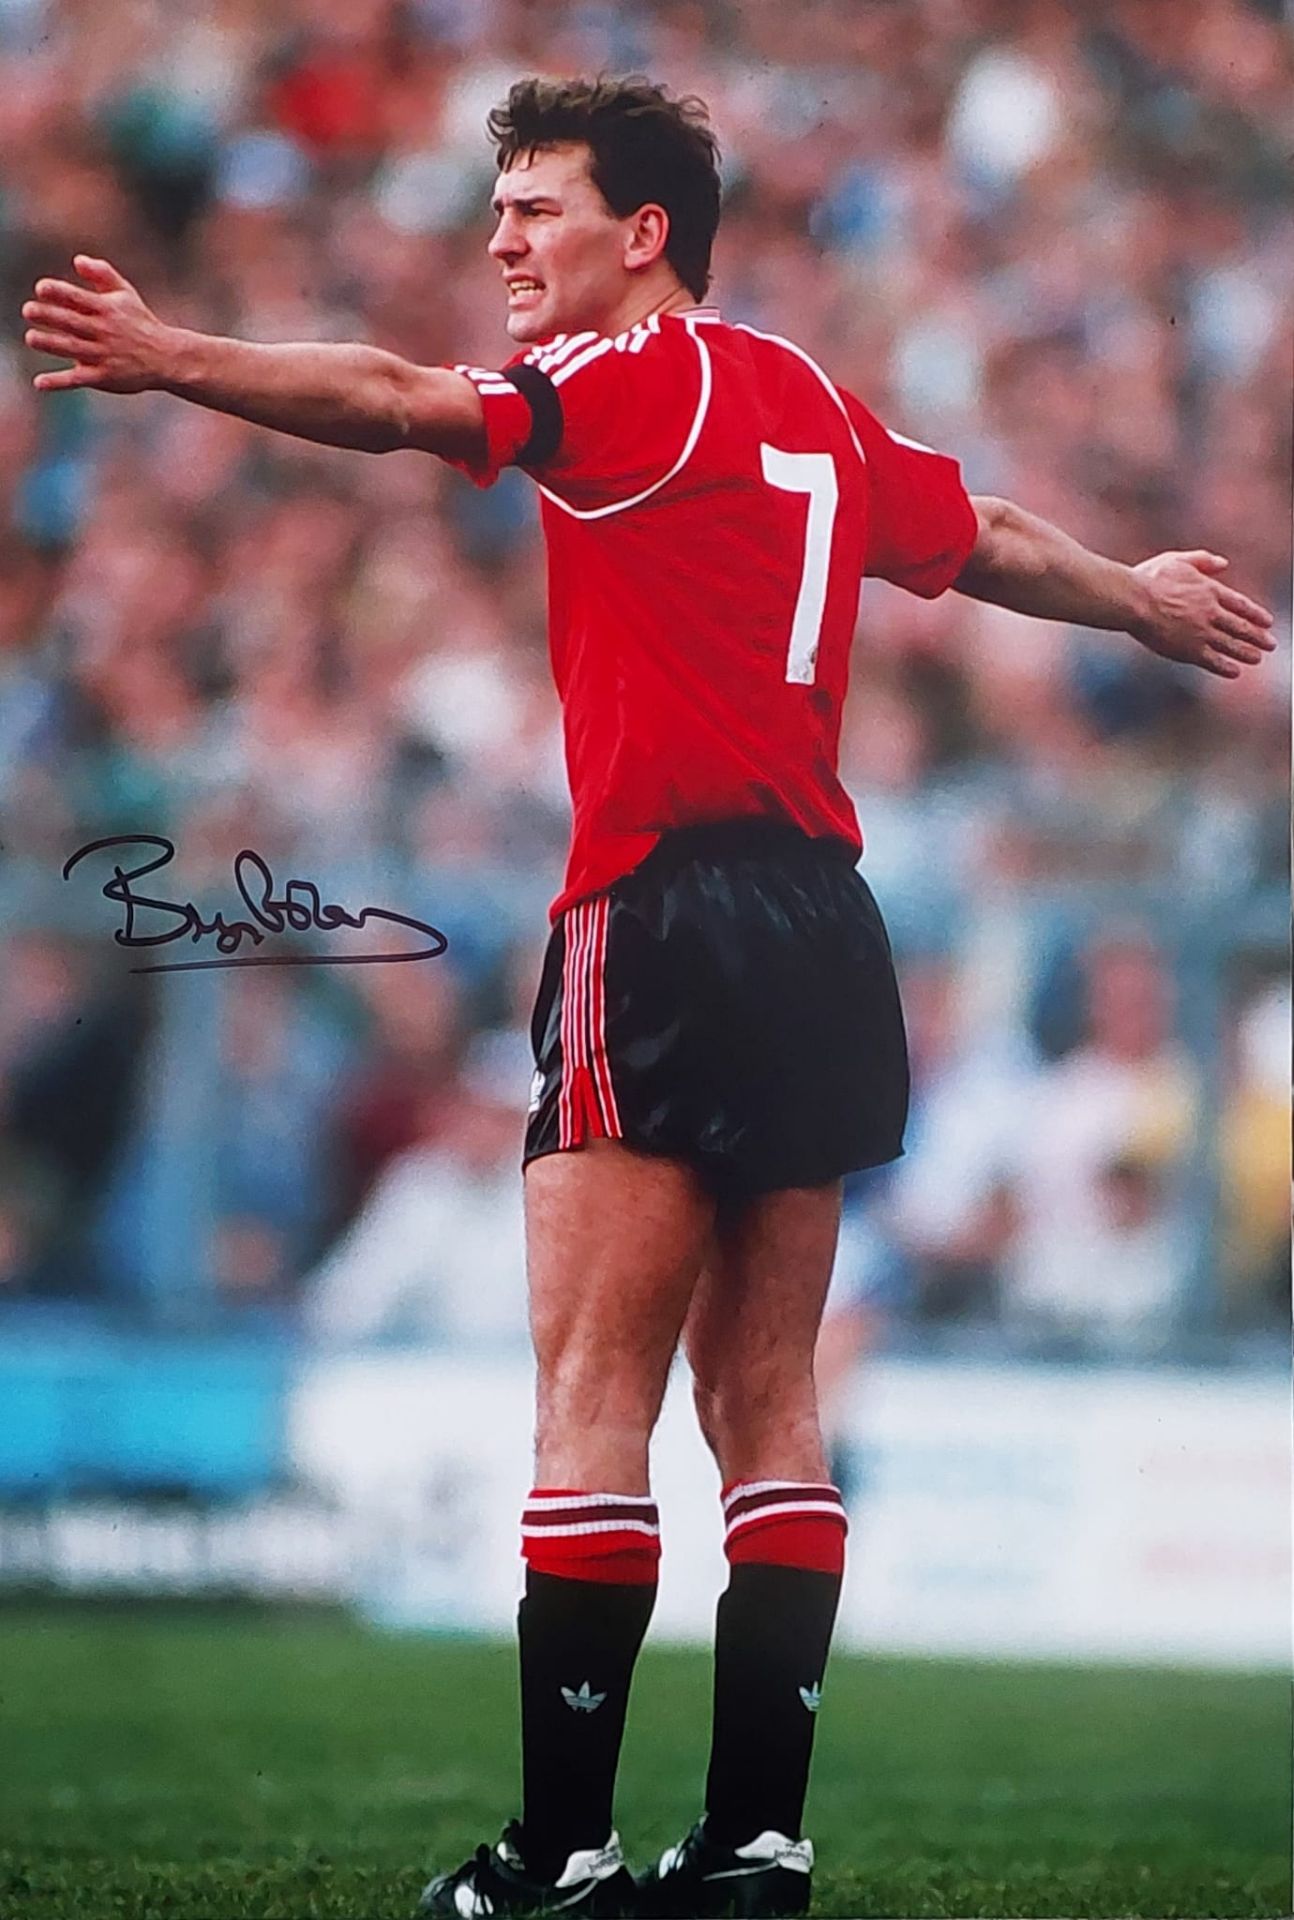 Bryan Robson Signed 12x8 Photo Autograph Manchester United Football AFTAL Approved Authenticators